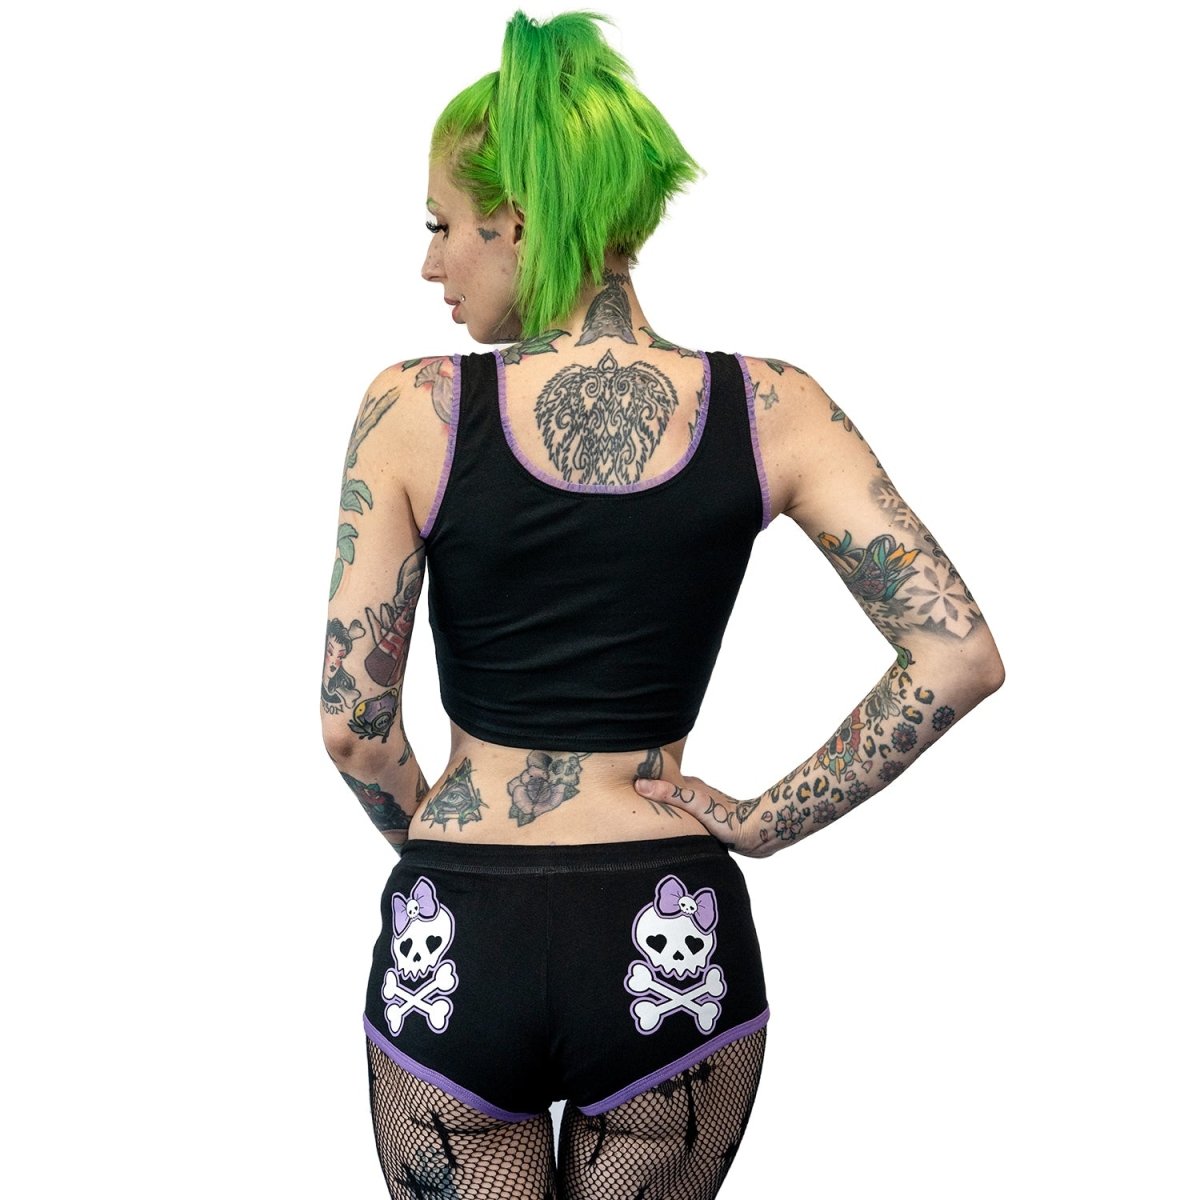 Too Fast | Cute Skull With Bow Purple Trim Short Shorts